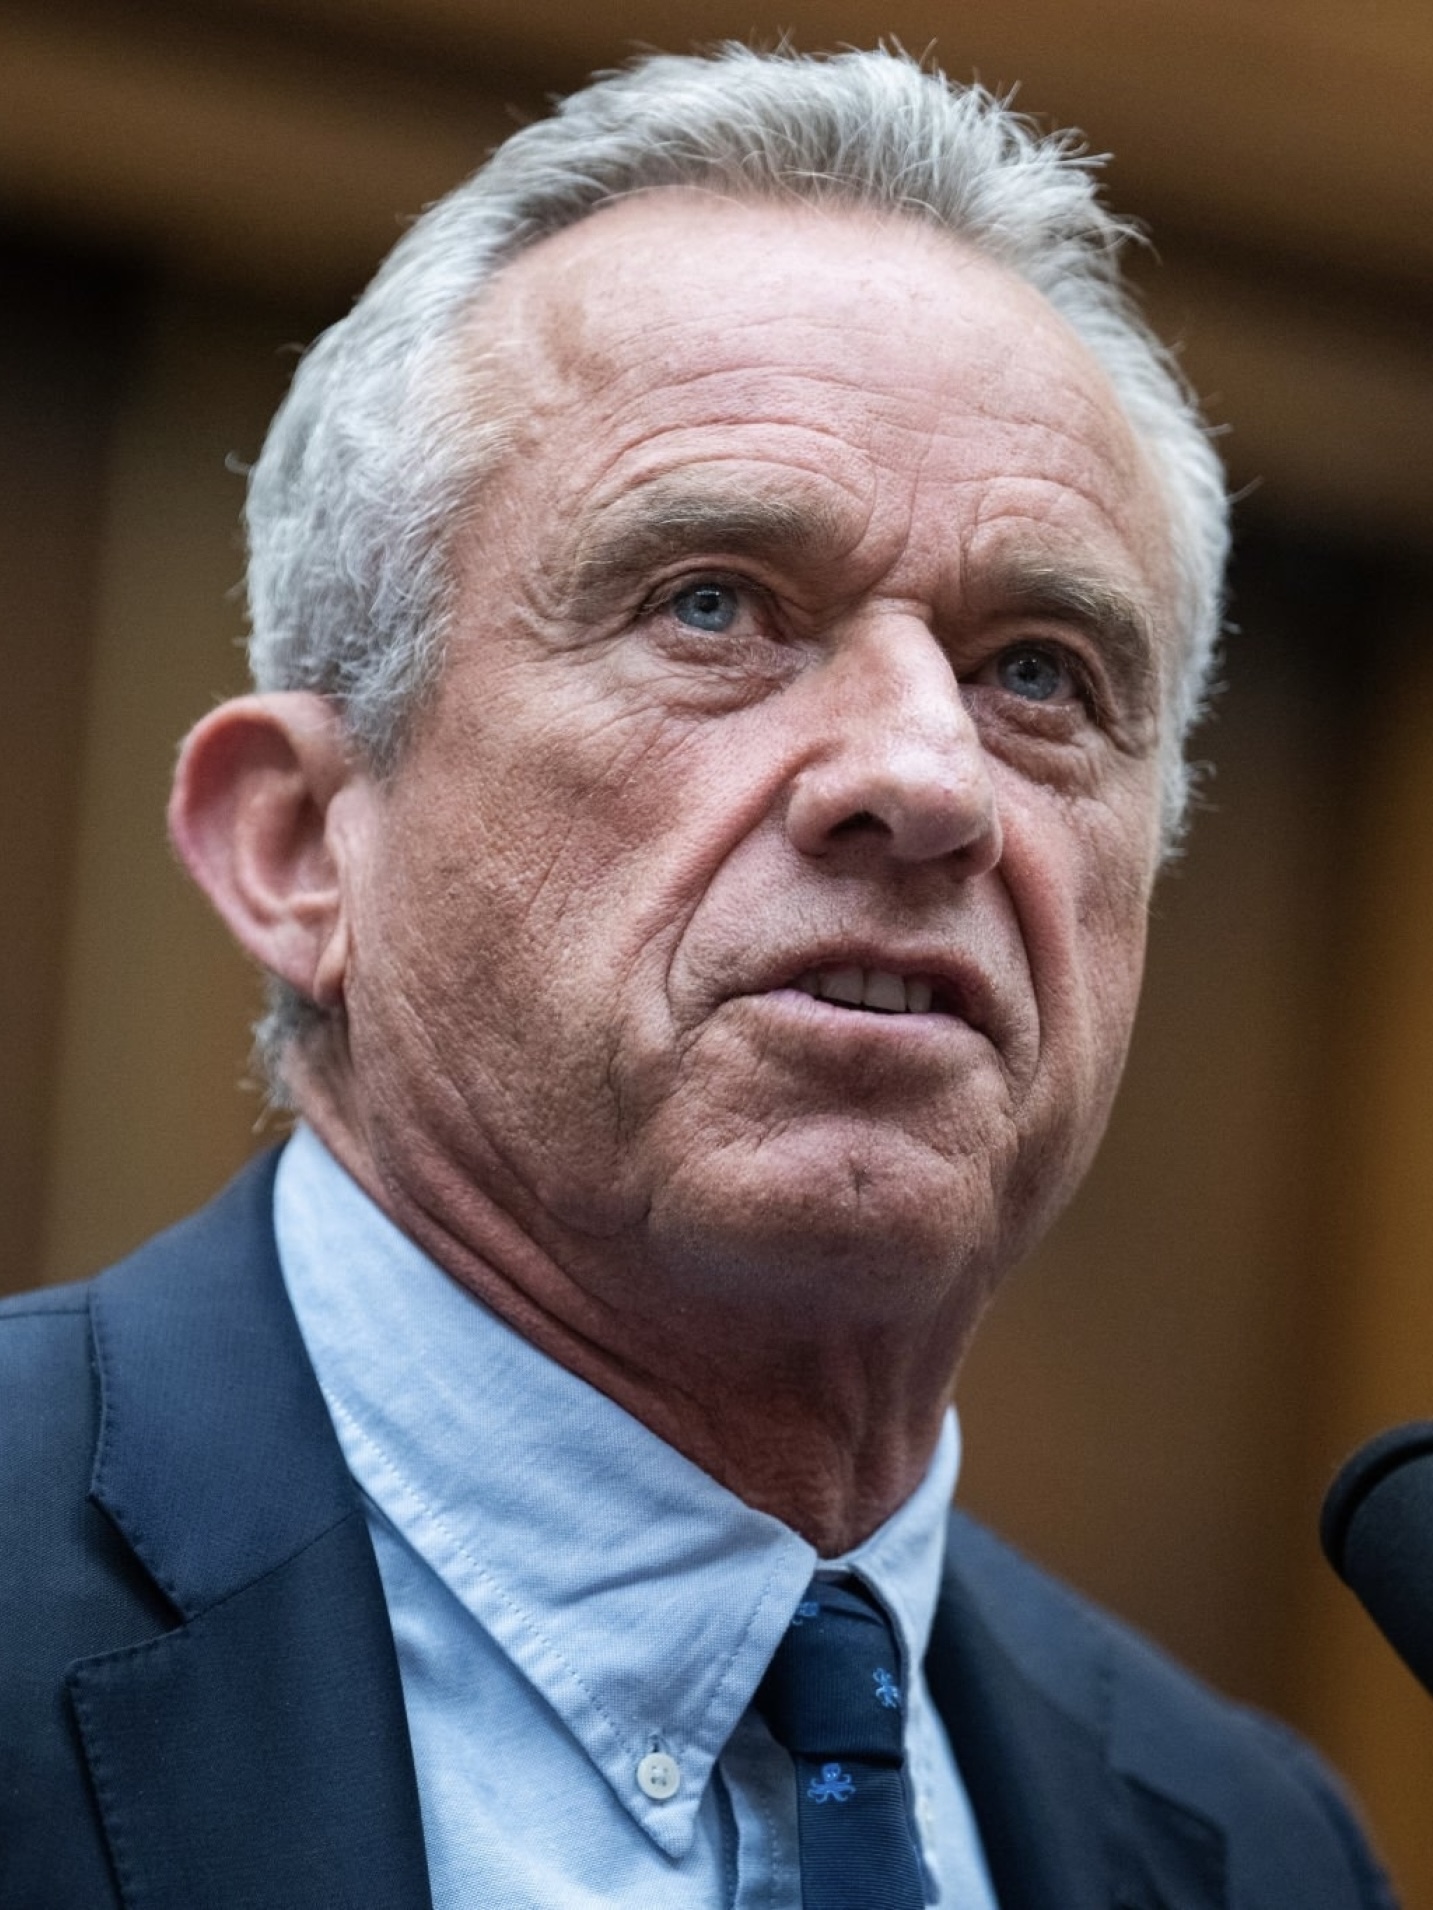 ROBERT F. KENNEDY JR.: “Presidents Trump and Biden are colluding to lock America into a head-to-head match-up that 70% say they do not want. They are trying to exclude me from their debate because they are afraid I would win” 🏆